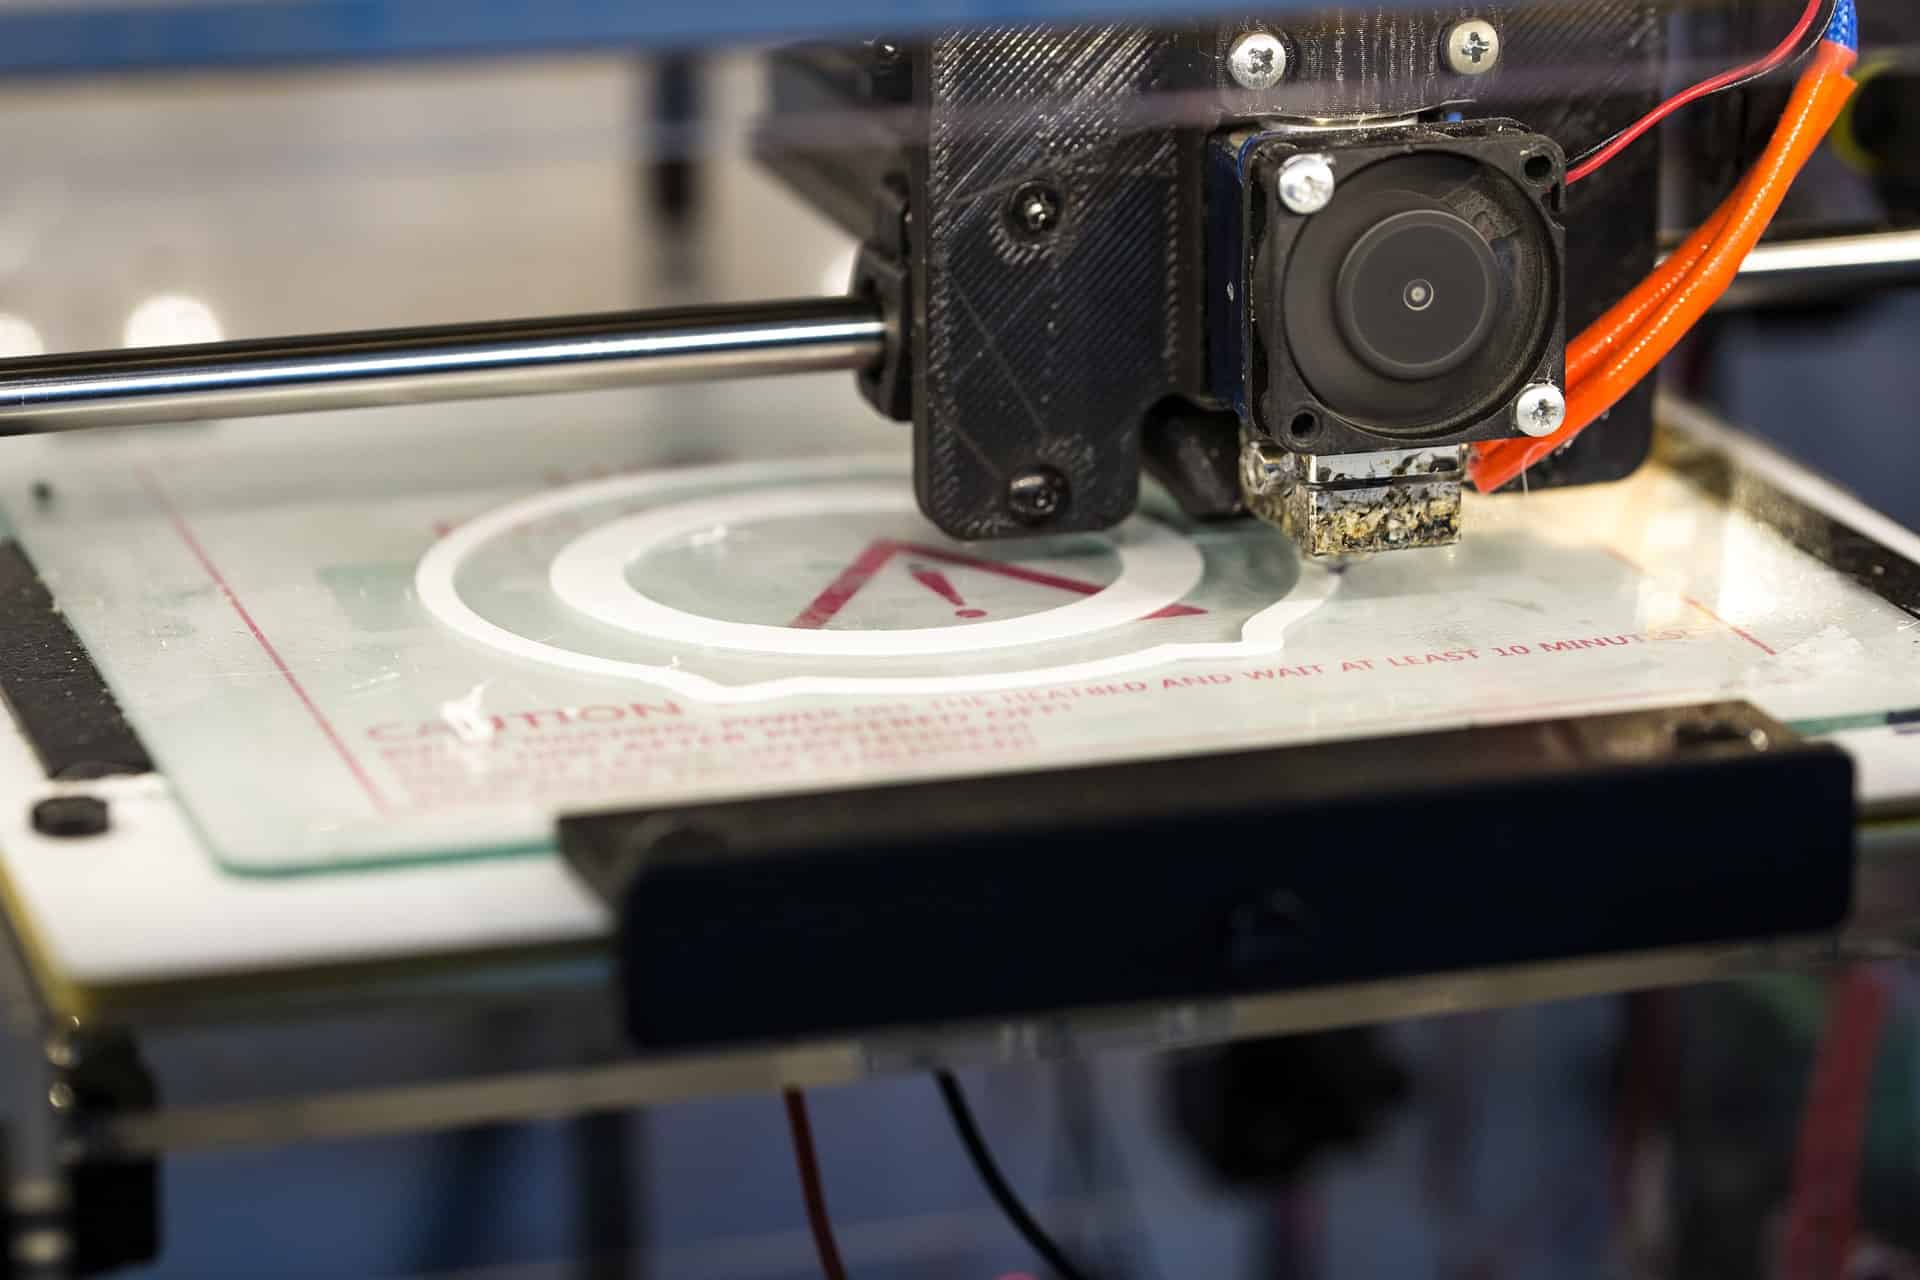 4D printing is coming - everything you need to know about it